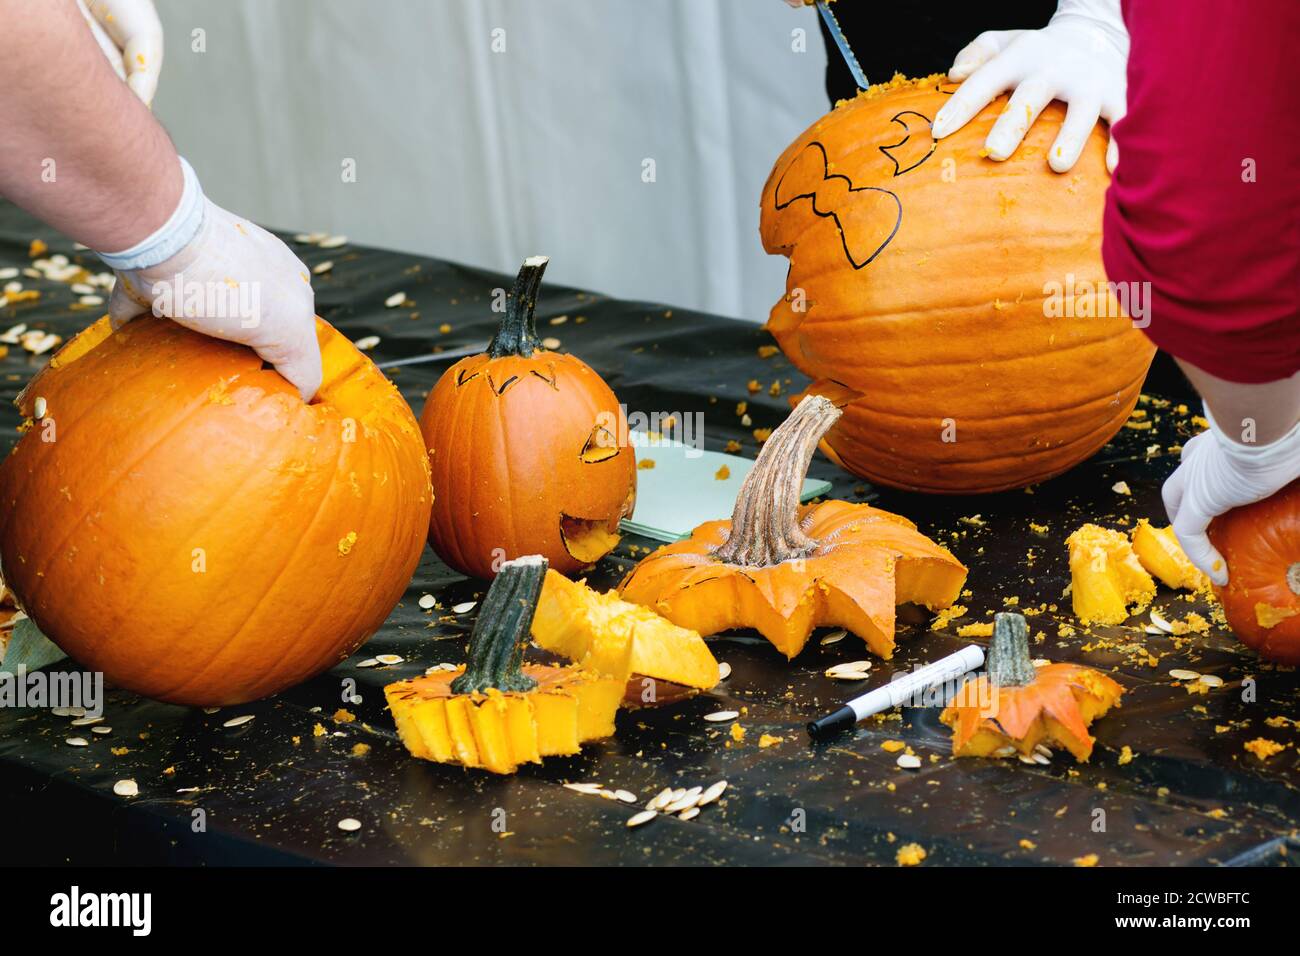 Process of Making Halloween pumpkins. Hands in rubber gloves sliced the pumpkin by small hacksaw. Stock Photo